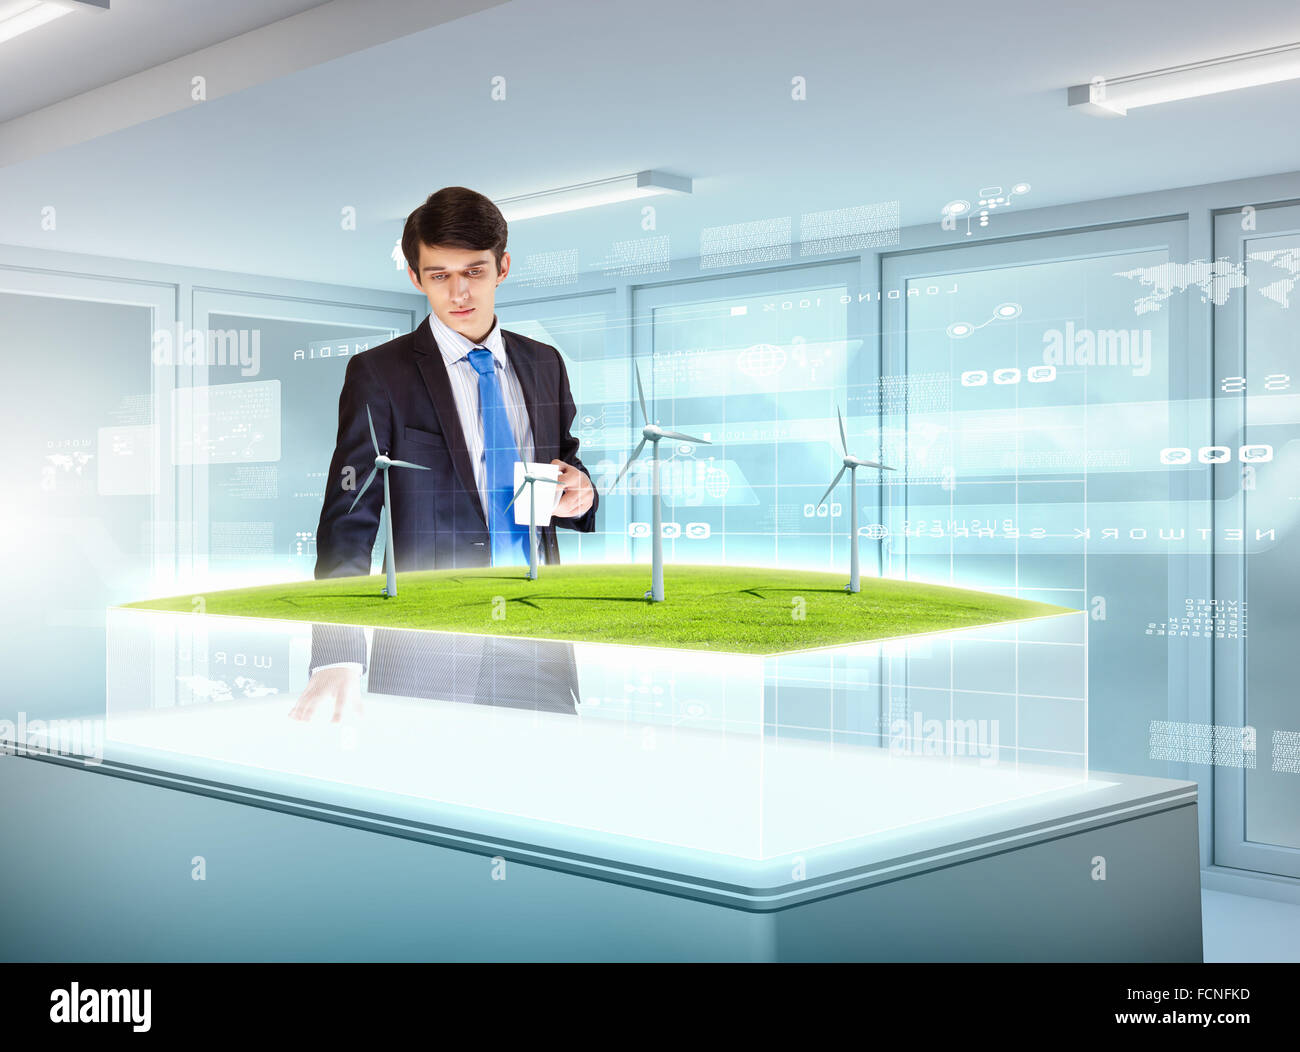 Image of young businessman looking at high-tech picture of windmills Stock Photo